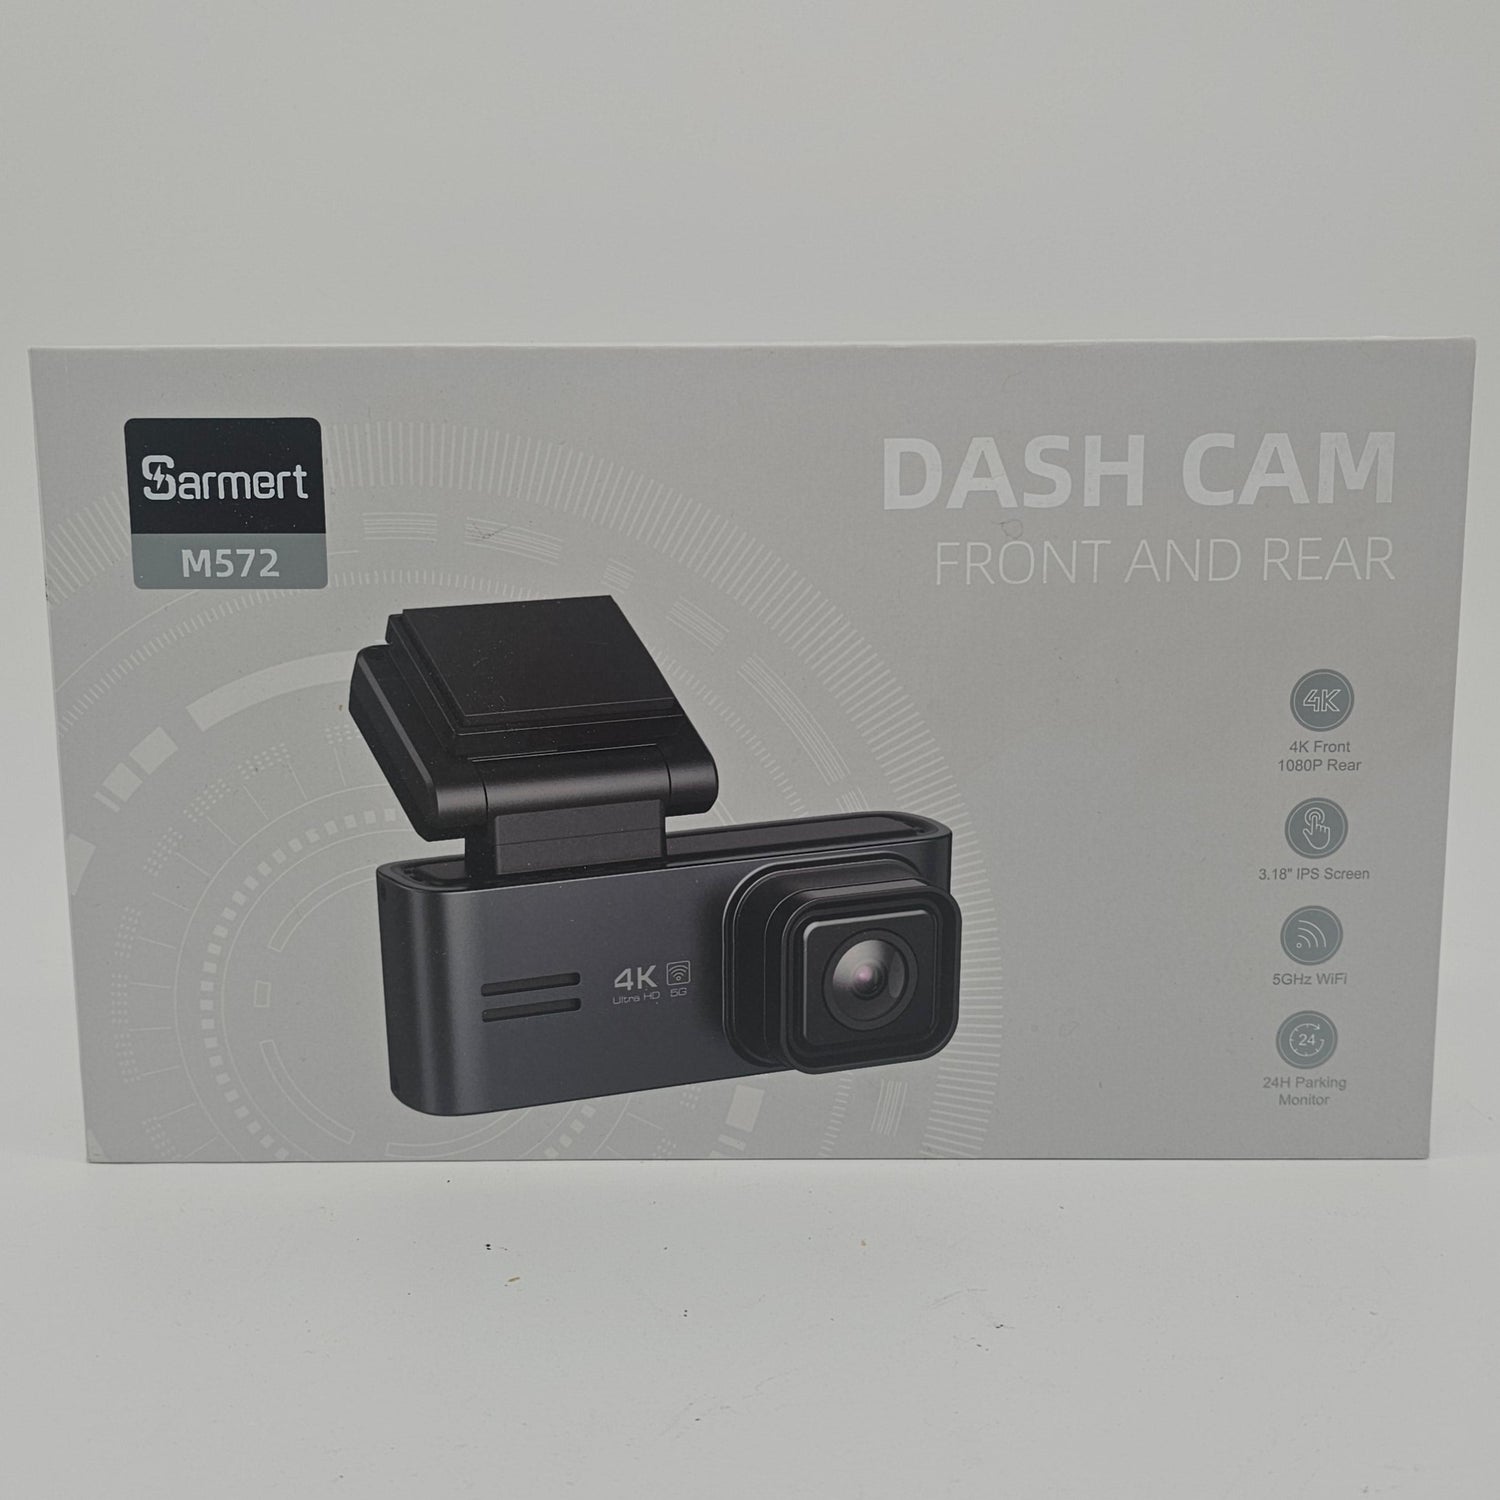 Dash Cam Front and Rear Sarmert M572 - DQ Distribution